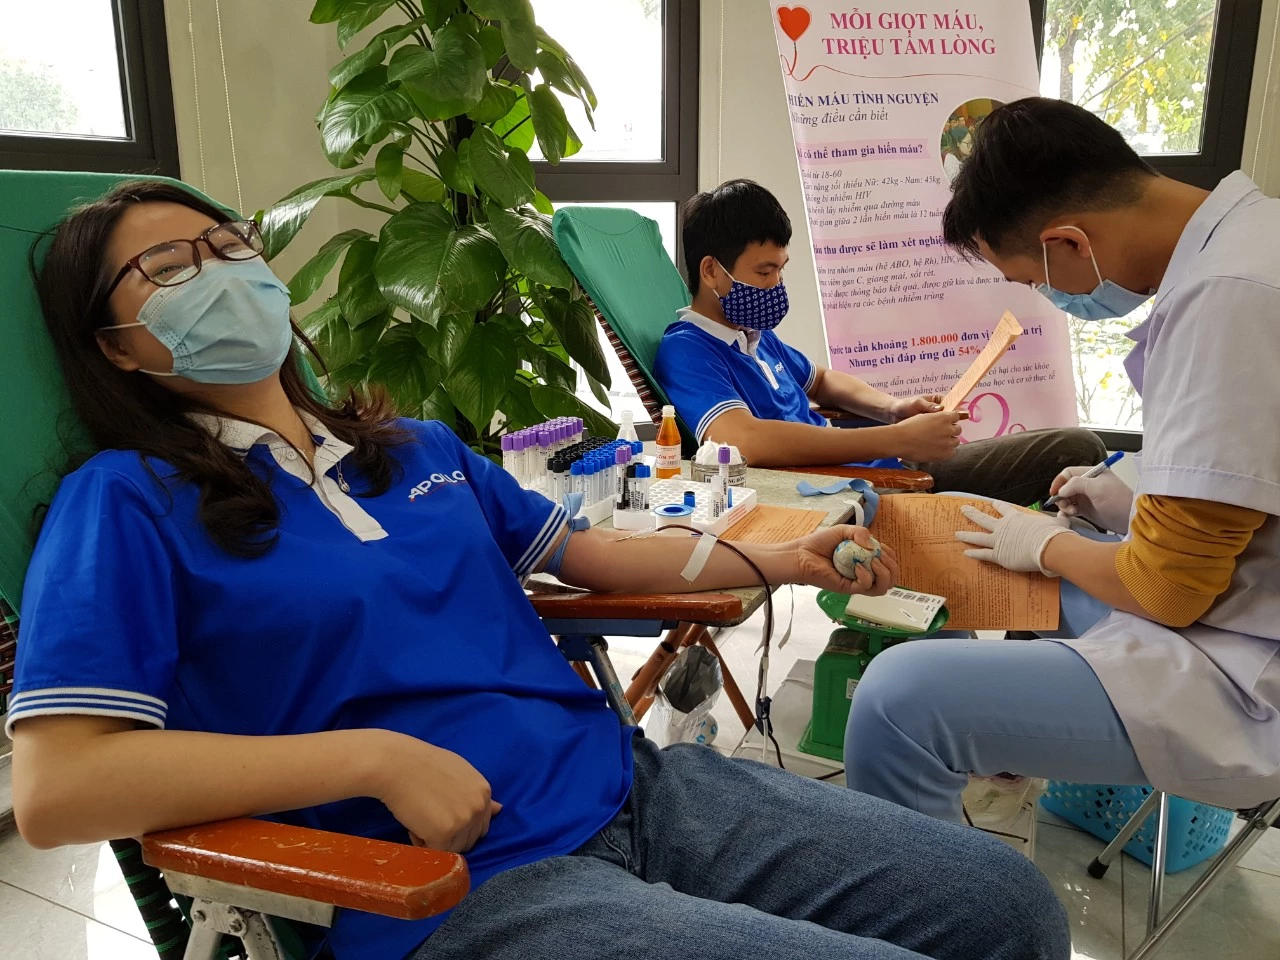 Donating blood helps patients in need of blood for treatment at Viet Duc Hospital